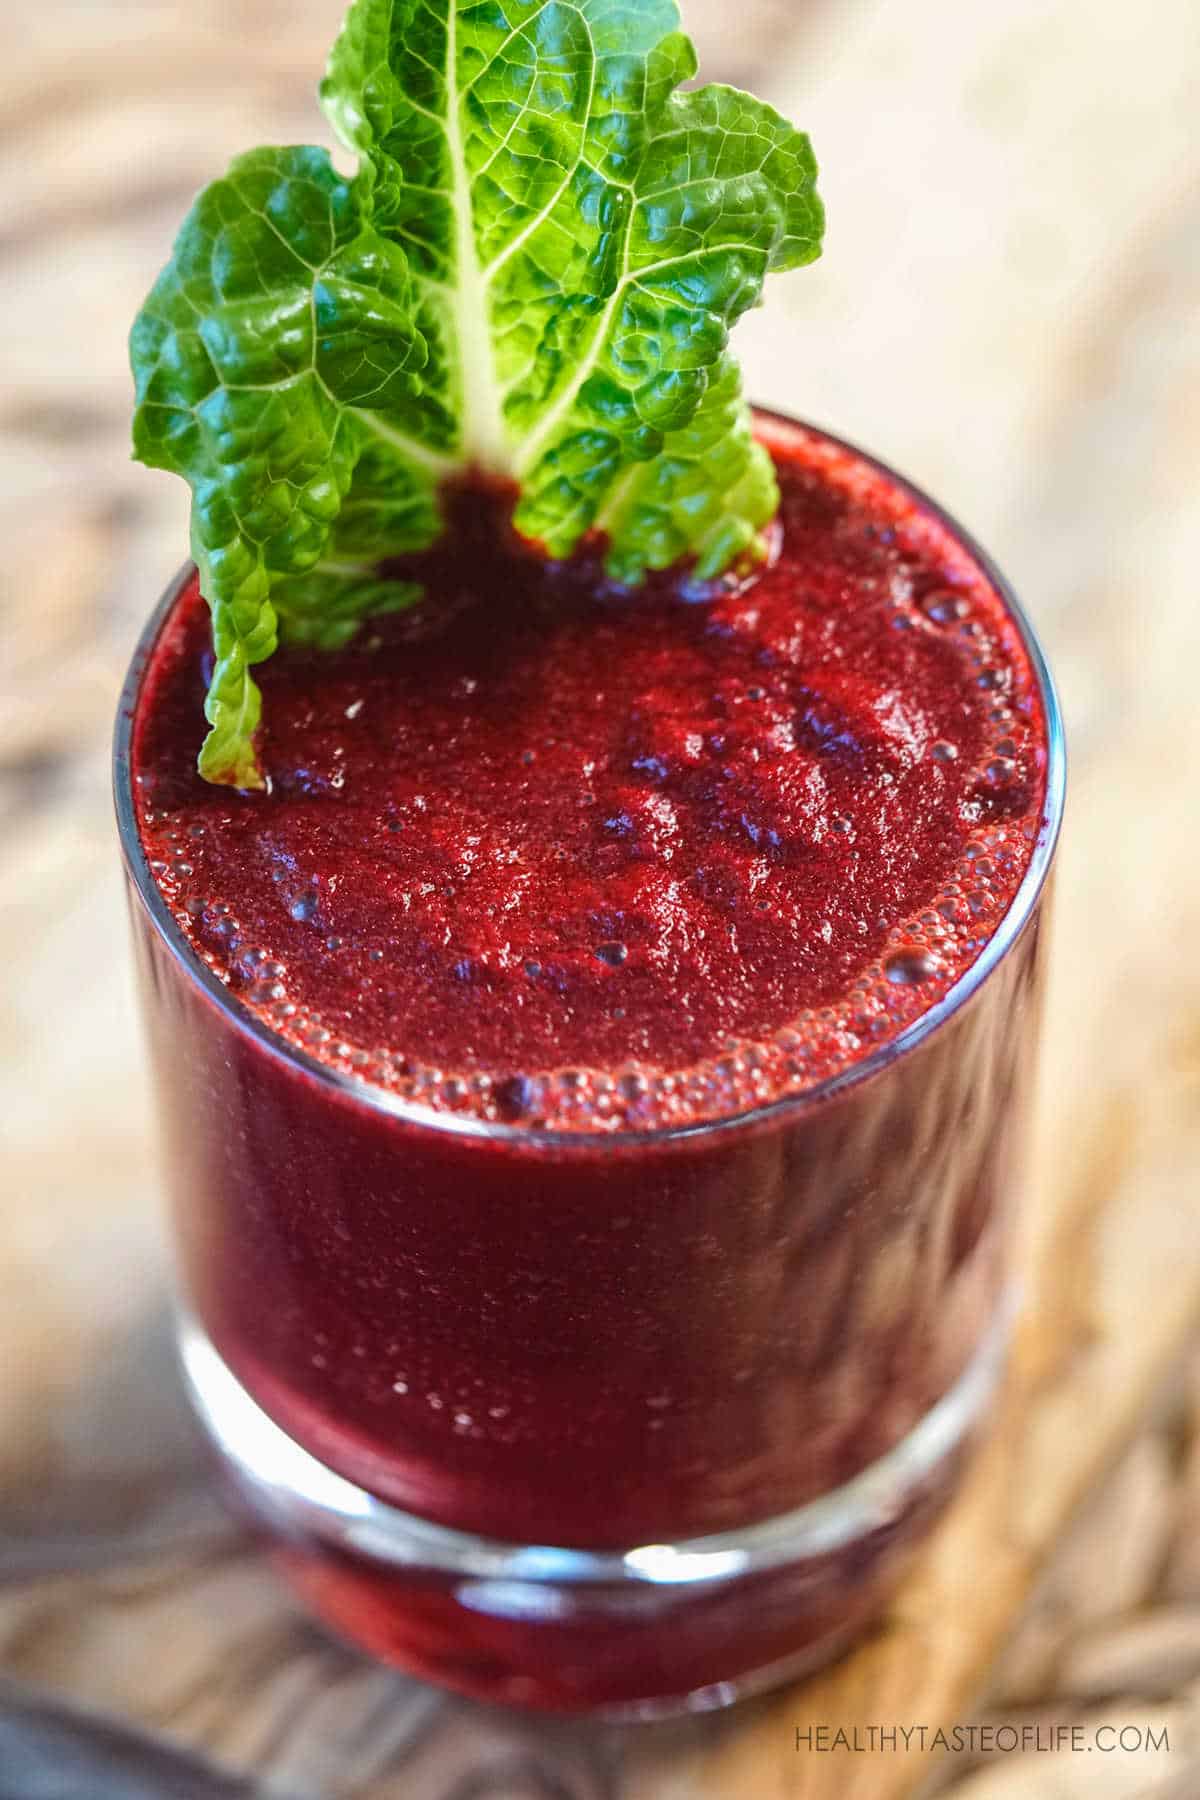 Colon cleanse and liver detox smoothie: cleanse your liver, flush your colon, boost your immune system and improve your blood flow with this  #beetsmoothie #detoxsmoothies  #colocleansesmoothie #liverdetoxsmoothie #smoothiedetox